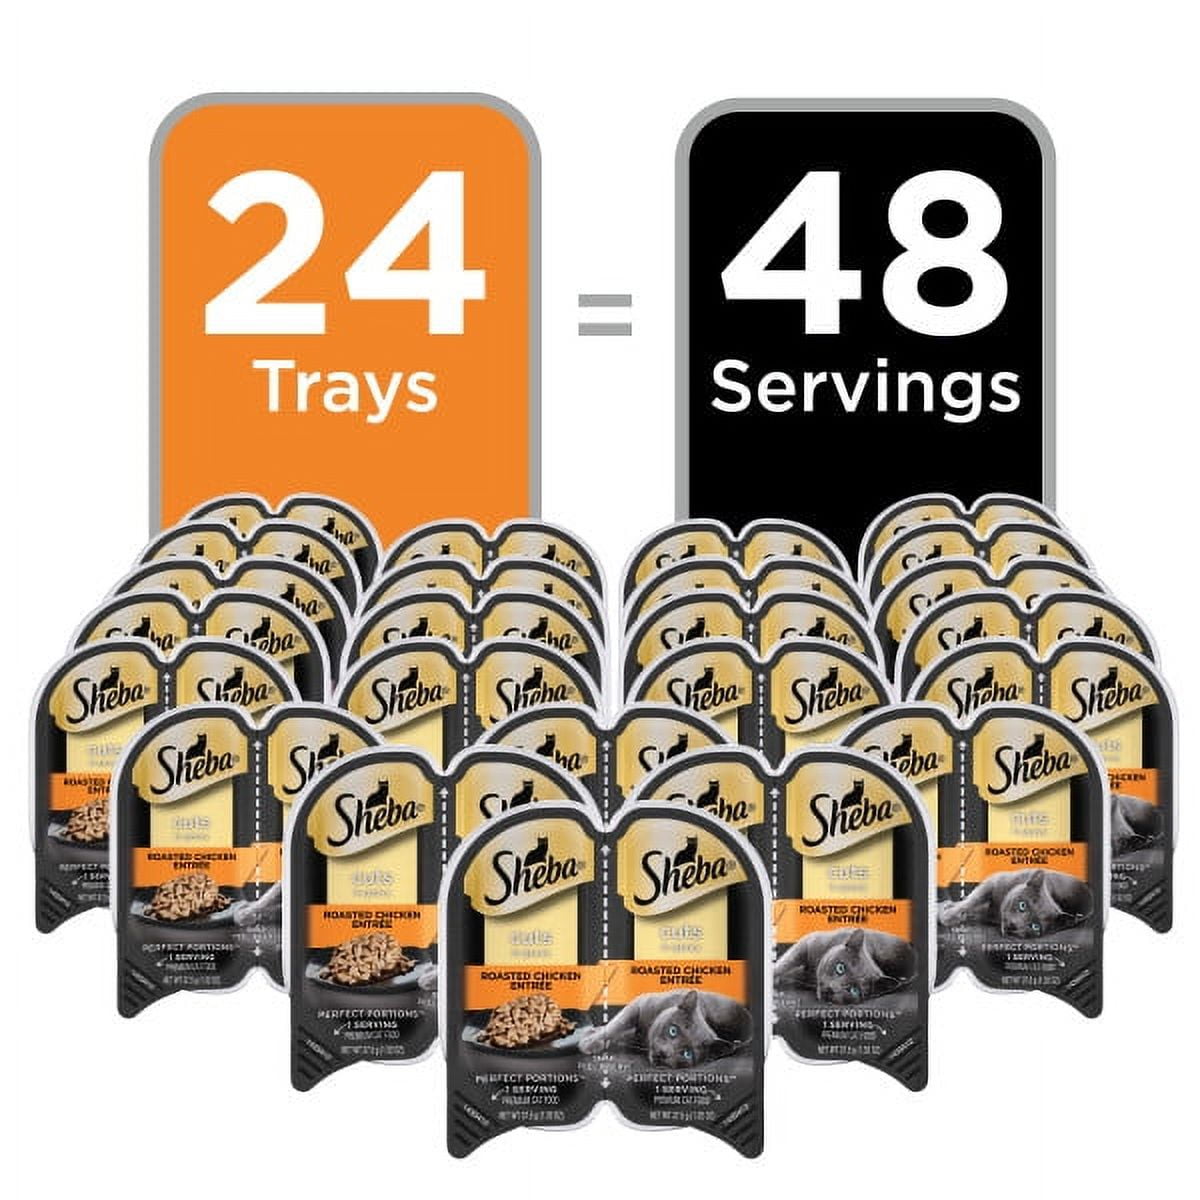 Wholesale prices with free shipping all over United States SHEBA PERFECT PORTIONS, Roasted Chicken Cuts in Gravy Entrée Wet Cat Food for Adult Cat, Twin Tray, 24-Pack - Steven Deals